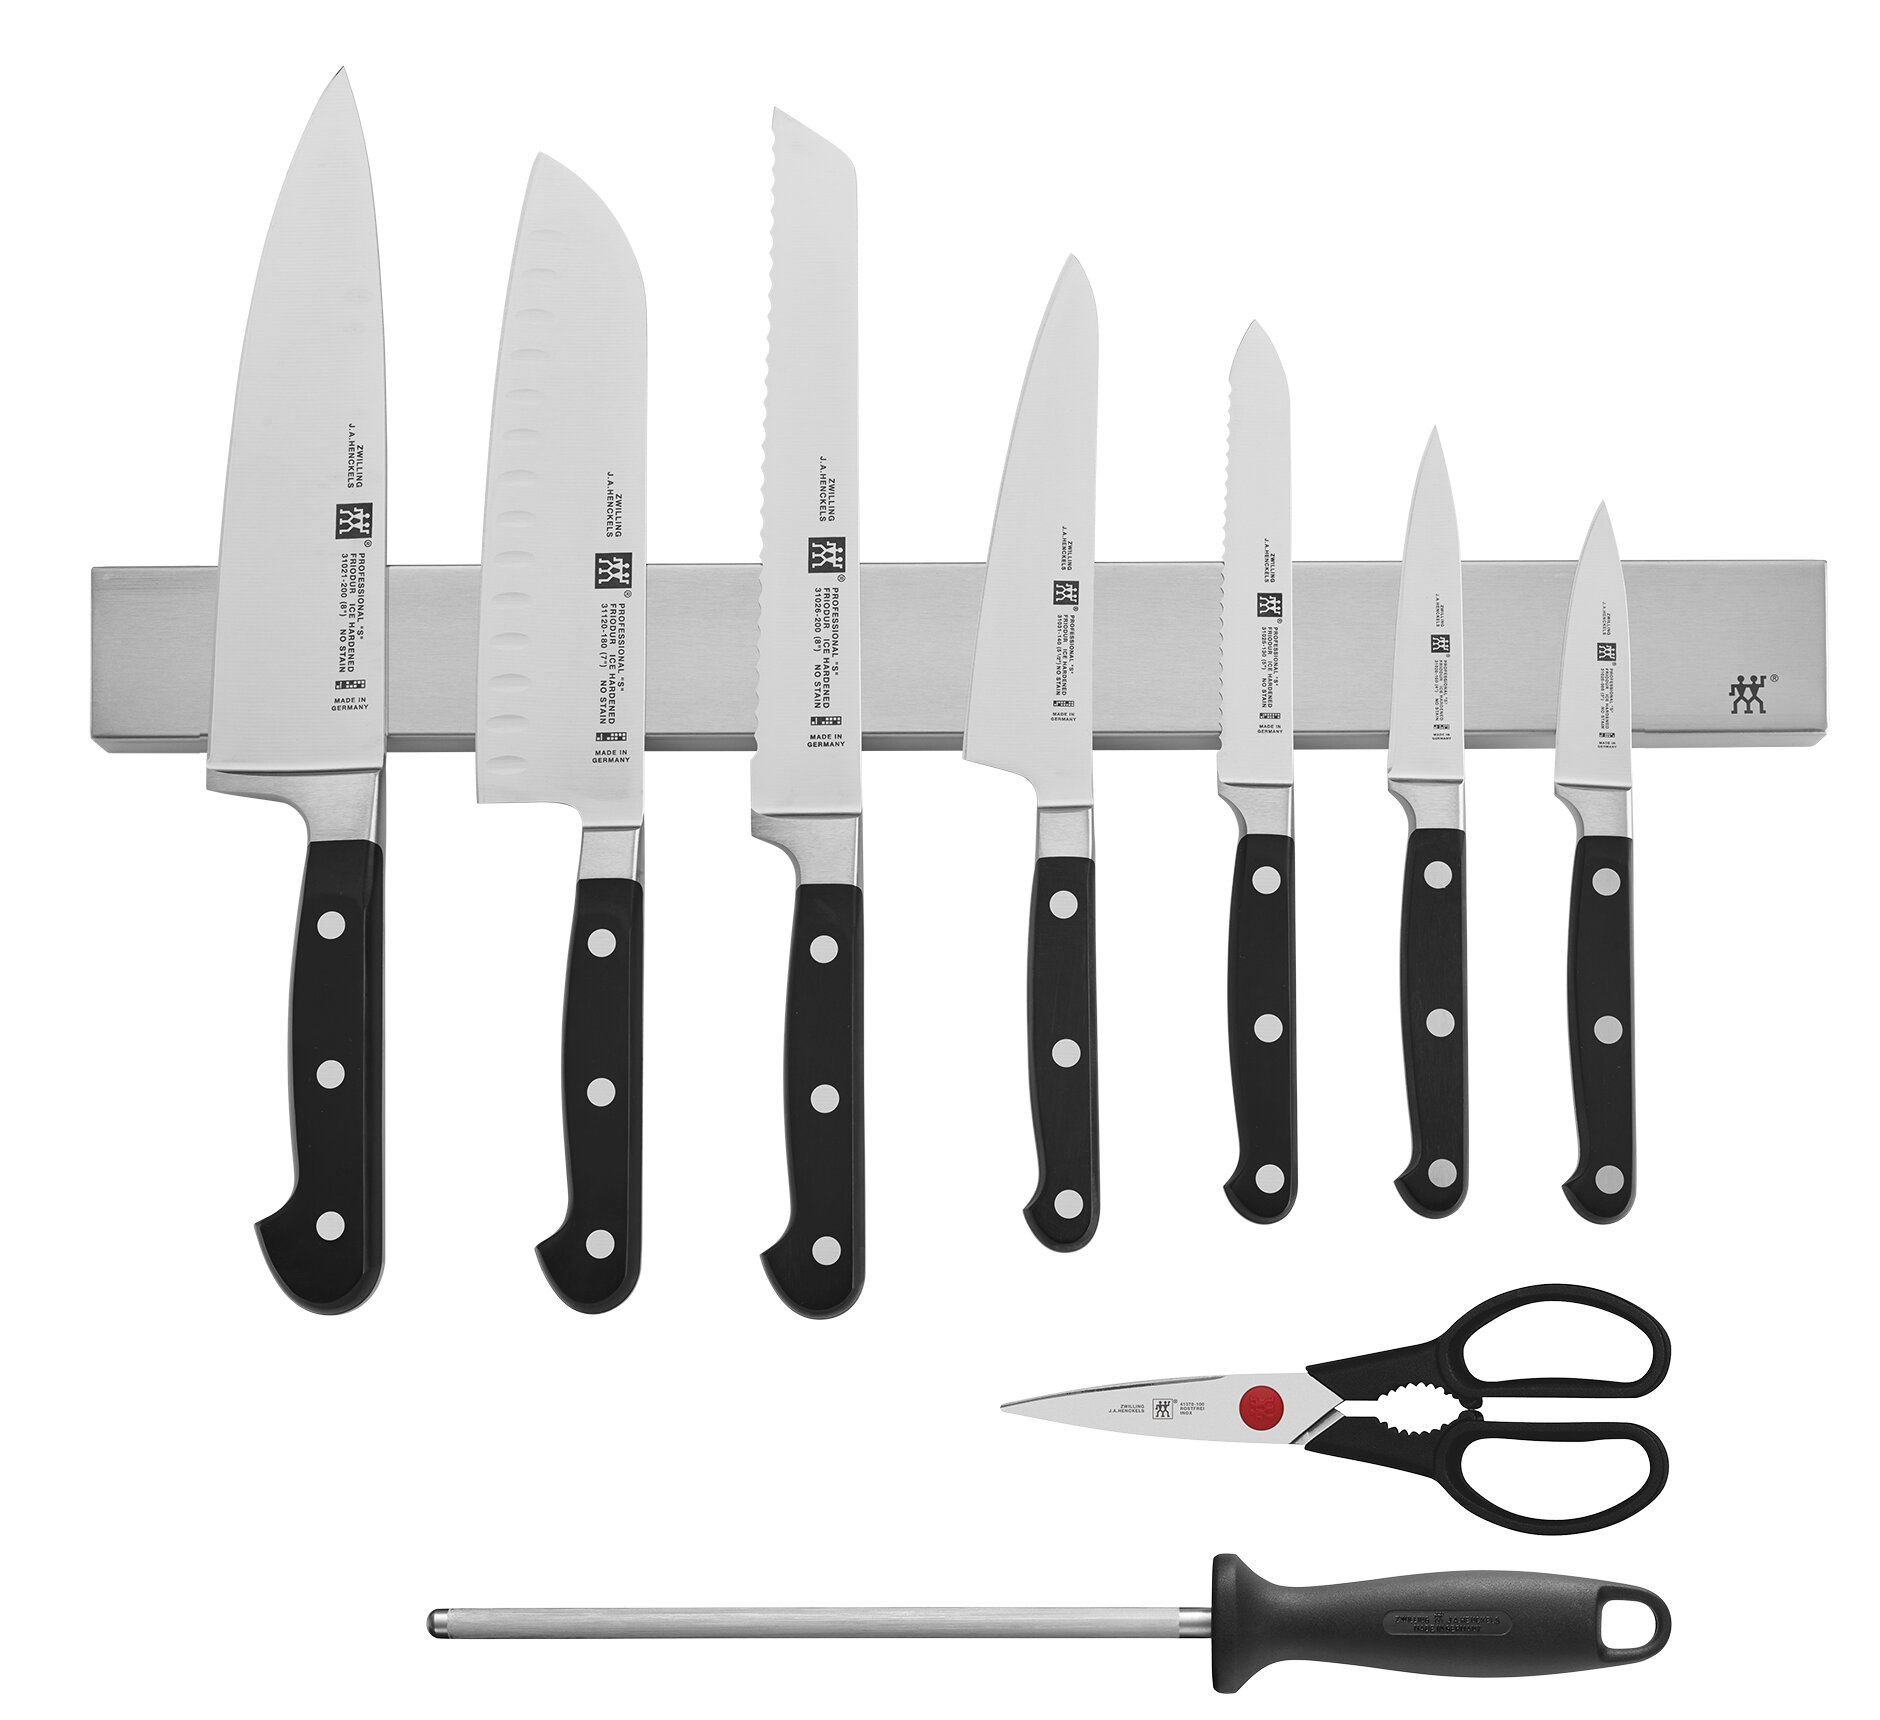 J.A. Henckels' Crazy-Popular Knife Set Is On Sale Right Now